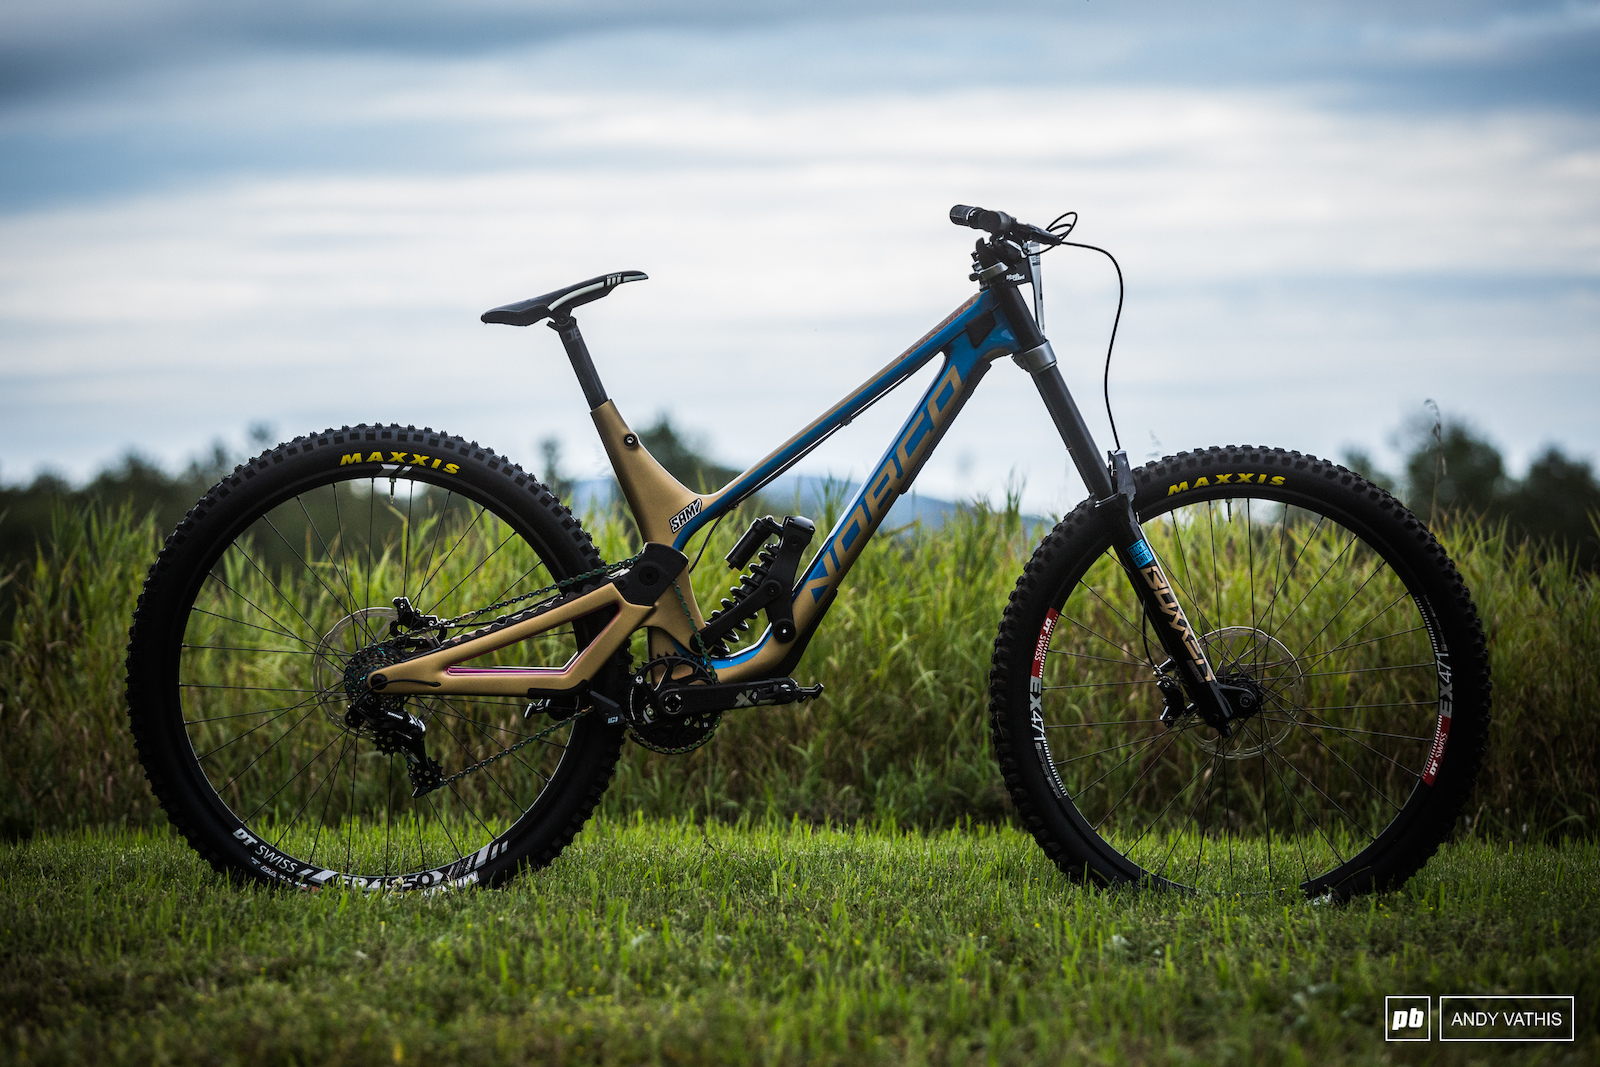 Sam Blenkinsop's Norco Aurum HSP. Throwback colorway from their first DH bike.